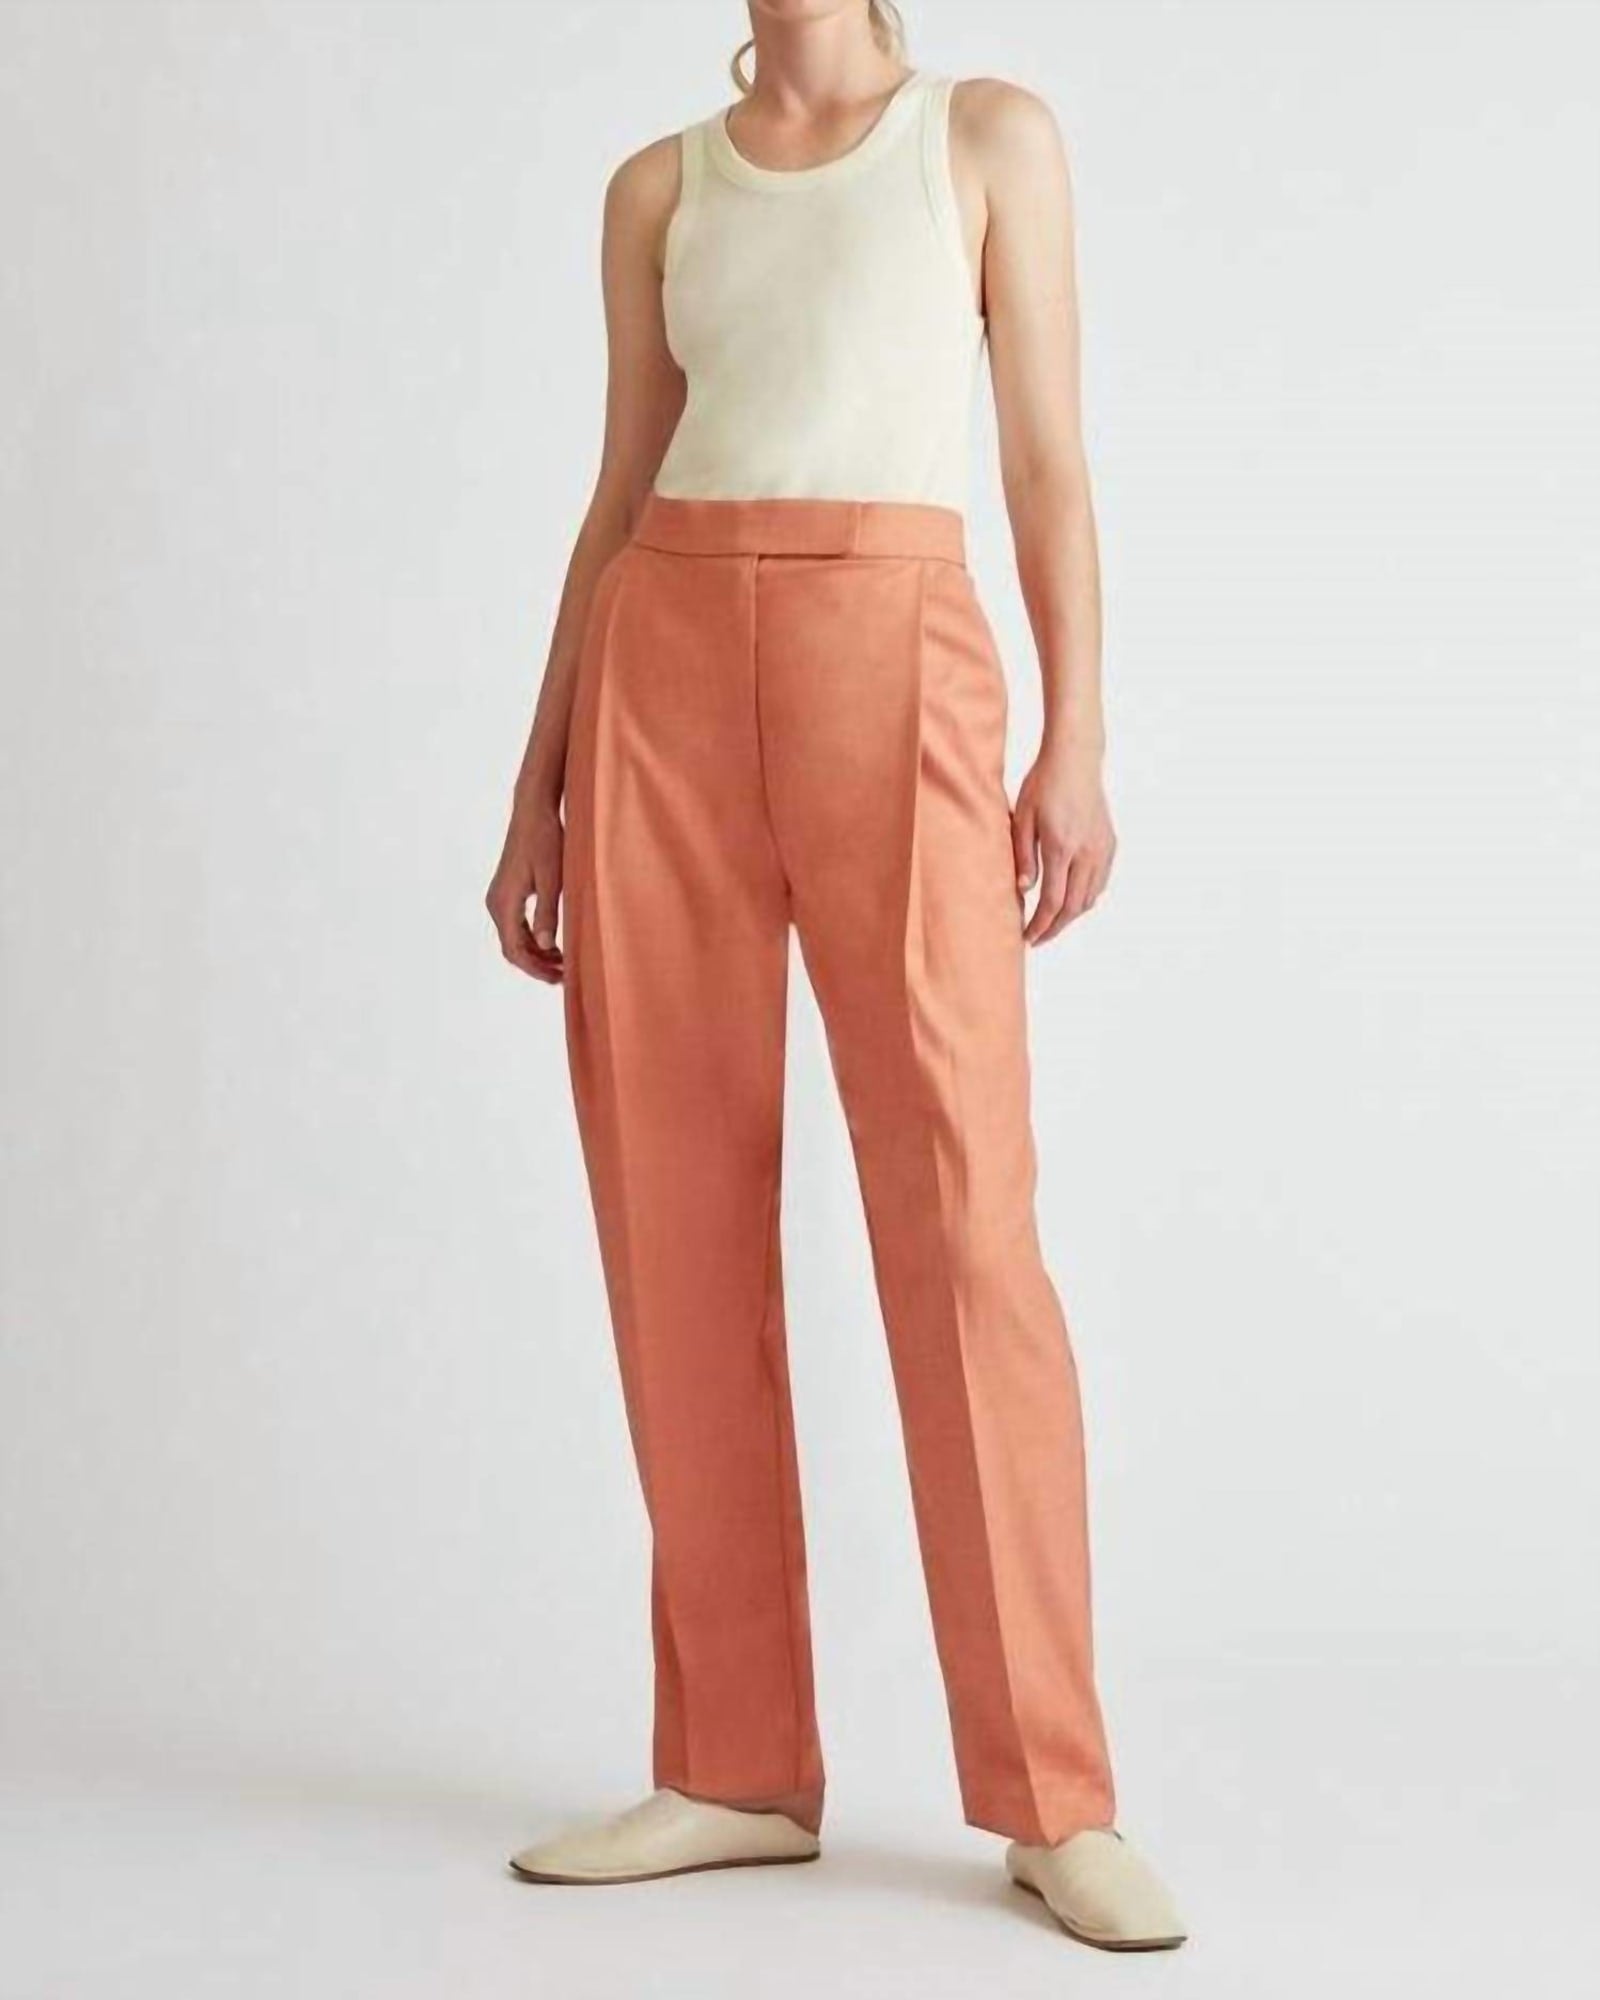 Marley Pant In Warm Guava | Warm Guava